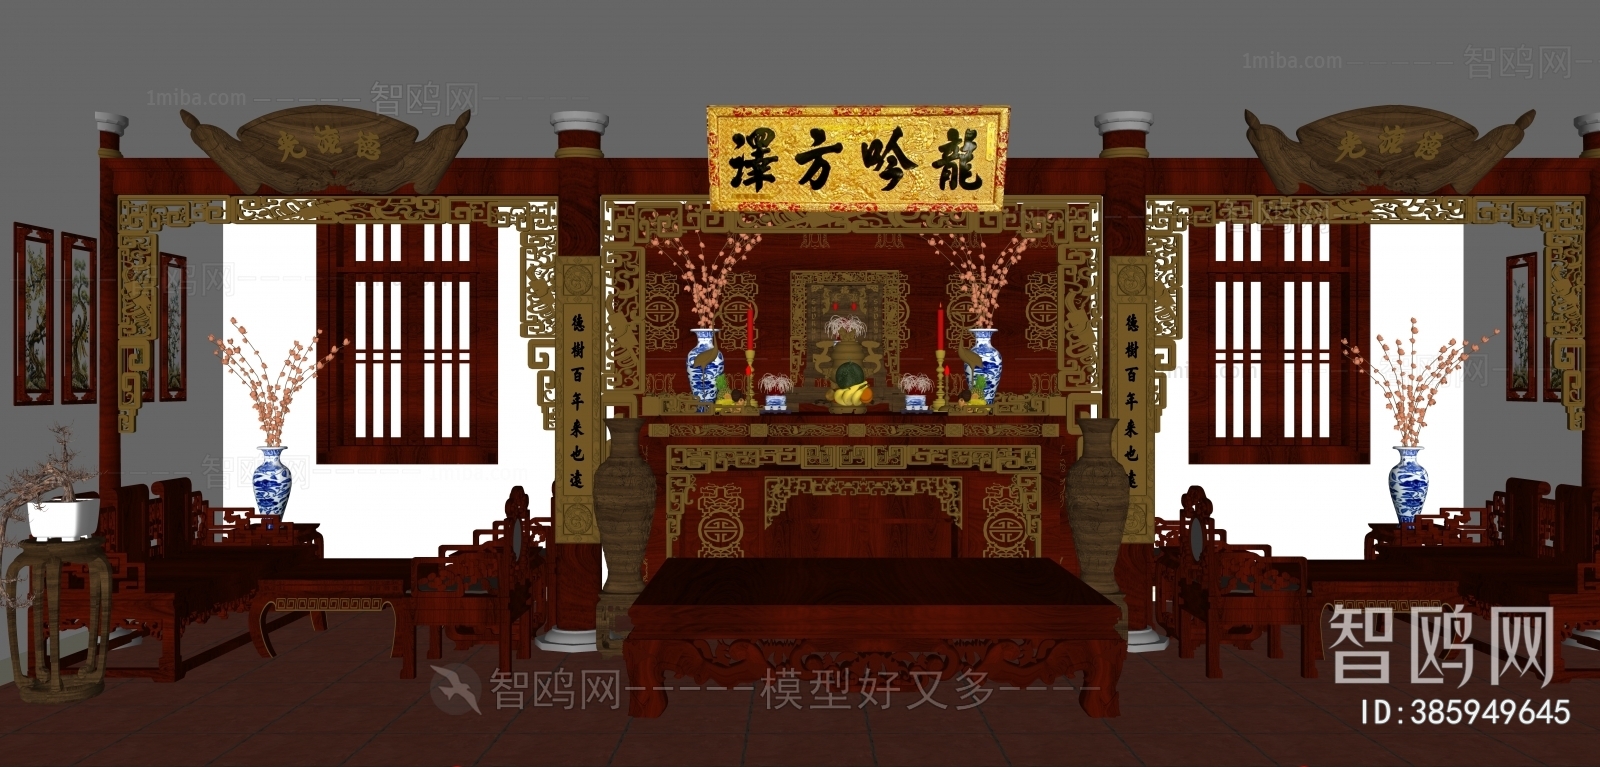 Chinese Style Temple